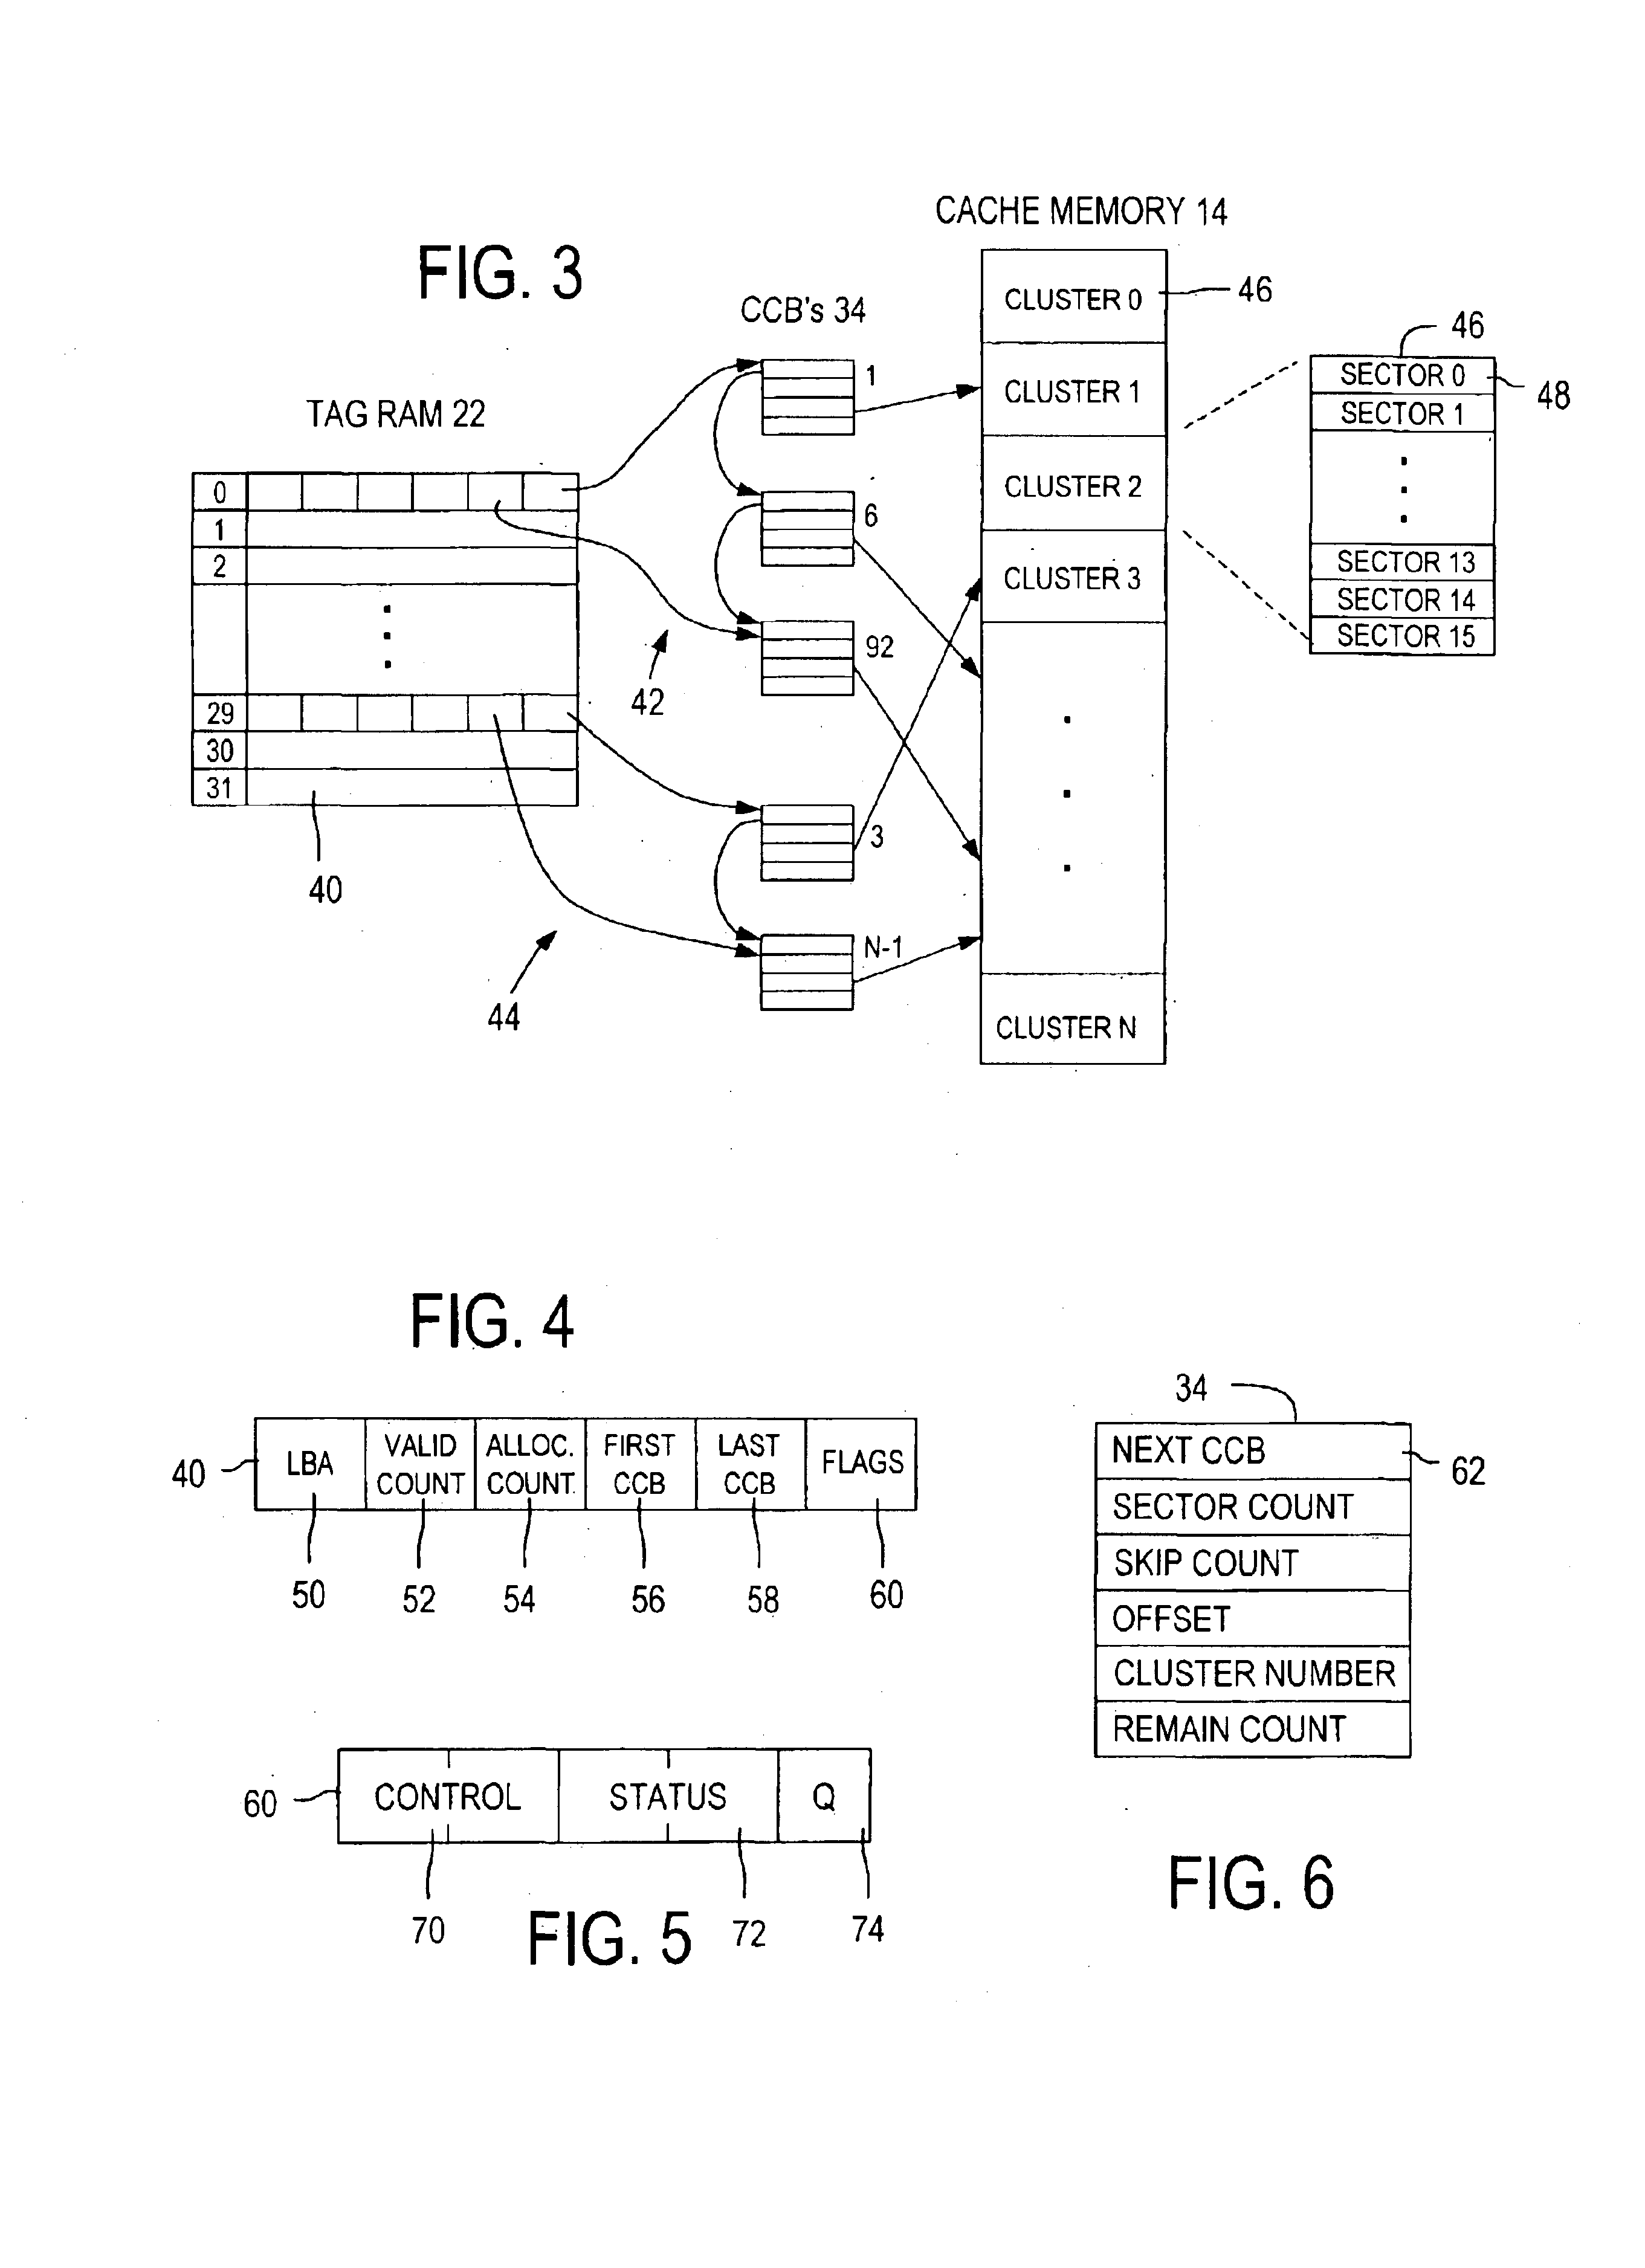 Range-based cache control system and method